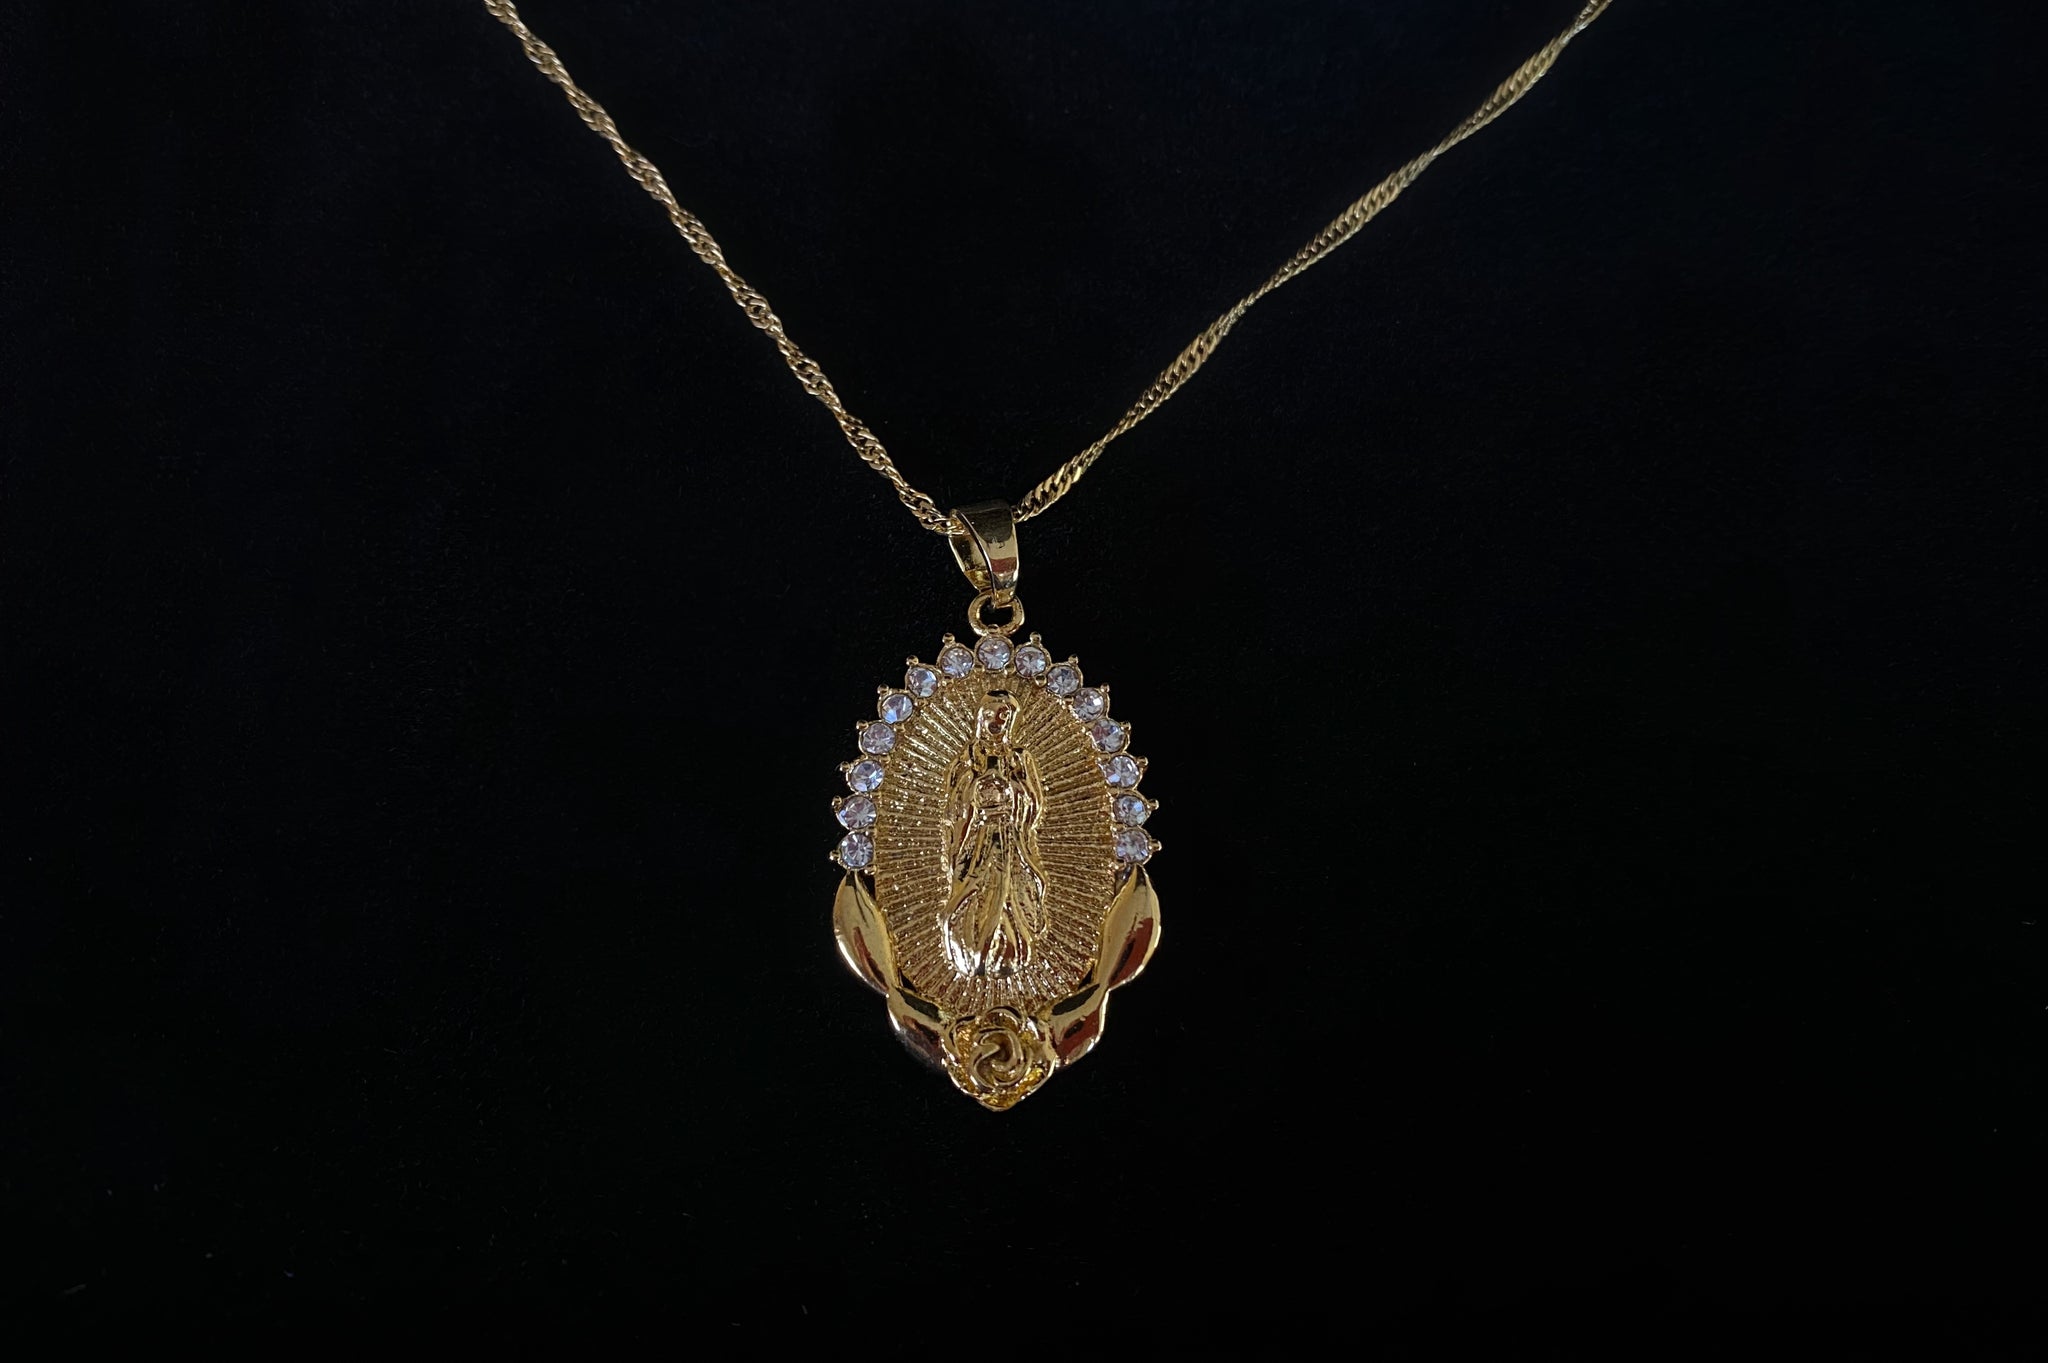 VIRGEN MARIA NECKLACE - Bling Ting